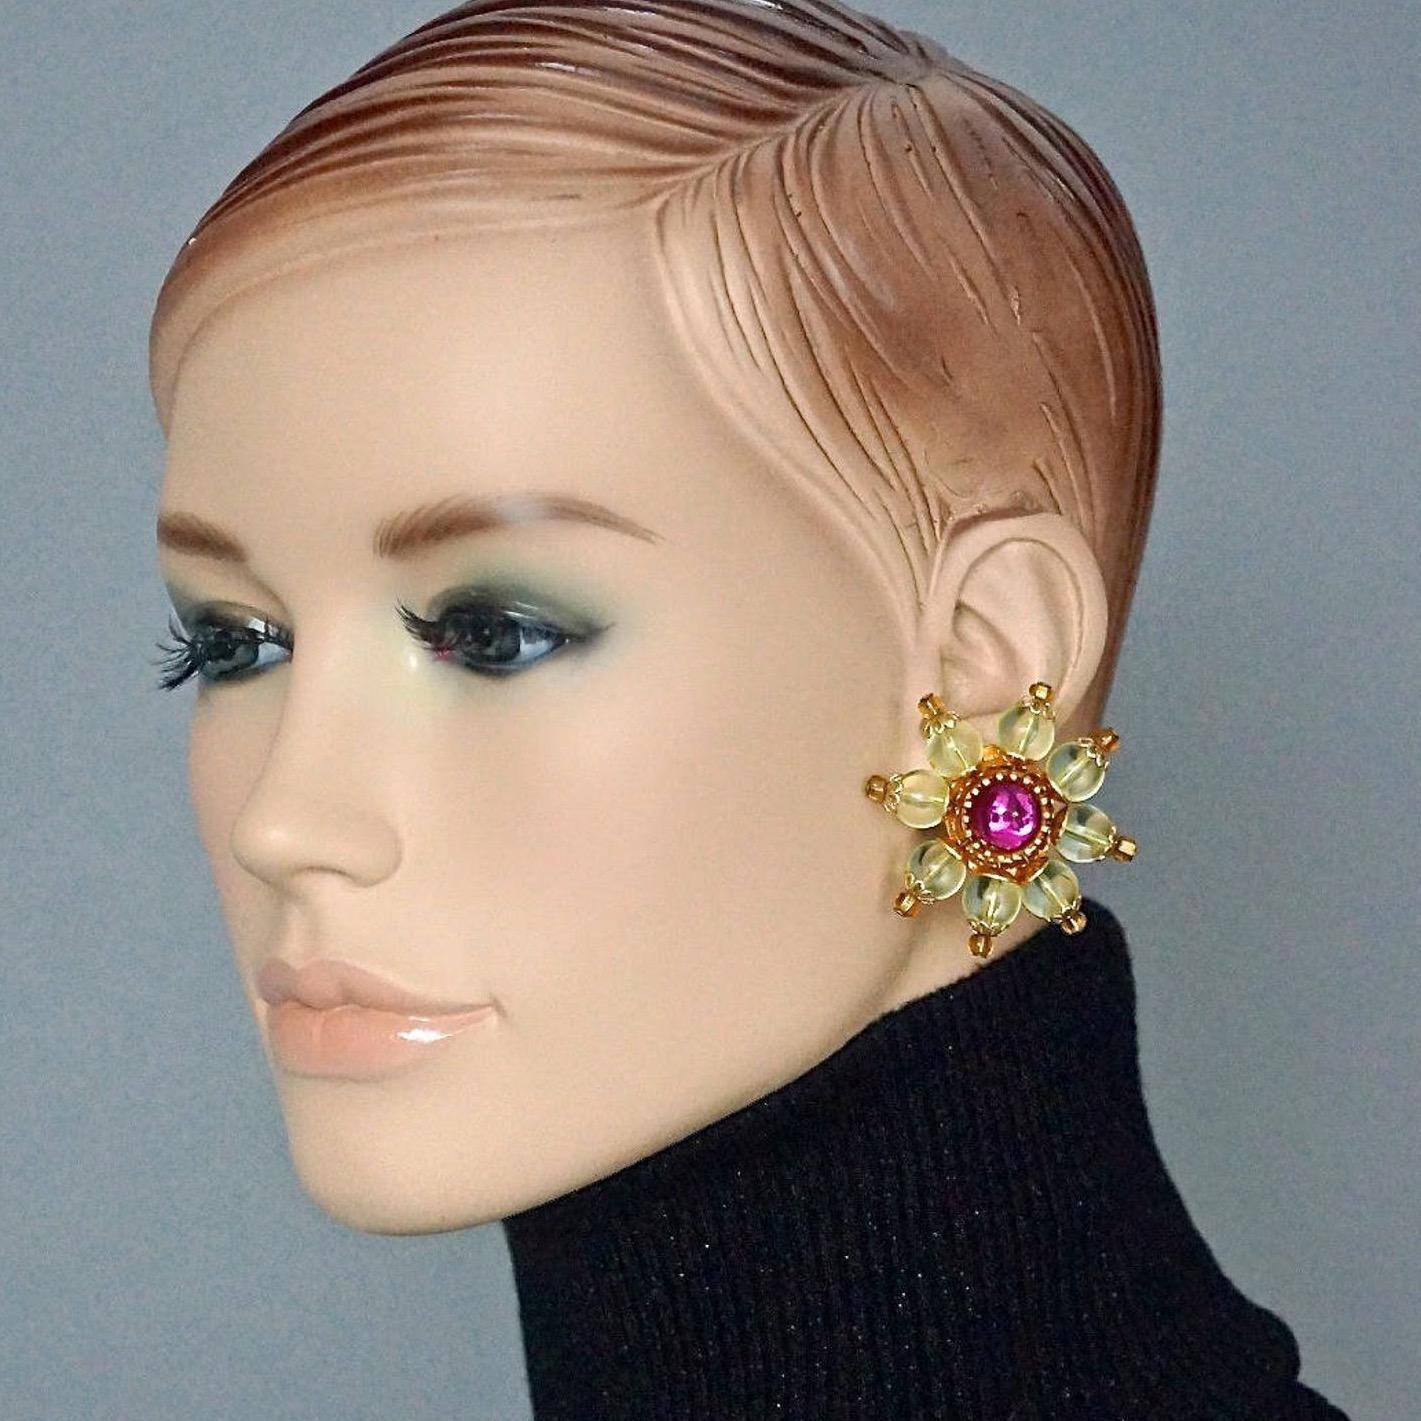 Vintage CHRISTIAN LACROIX Lucite Flower Bead Cabochon Earrings

Measurements:
Height: 1.81 inches (4.6 cm)
Width: 1.81 inches (4.6 cm)
Weight per Earring: 17 grams

Features:
- 100% Authentic CHRISTIAN LACROIX.
- Large lucite flower in yellow resin